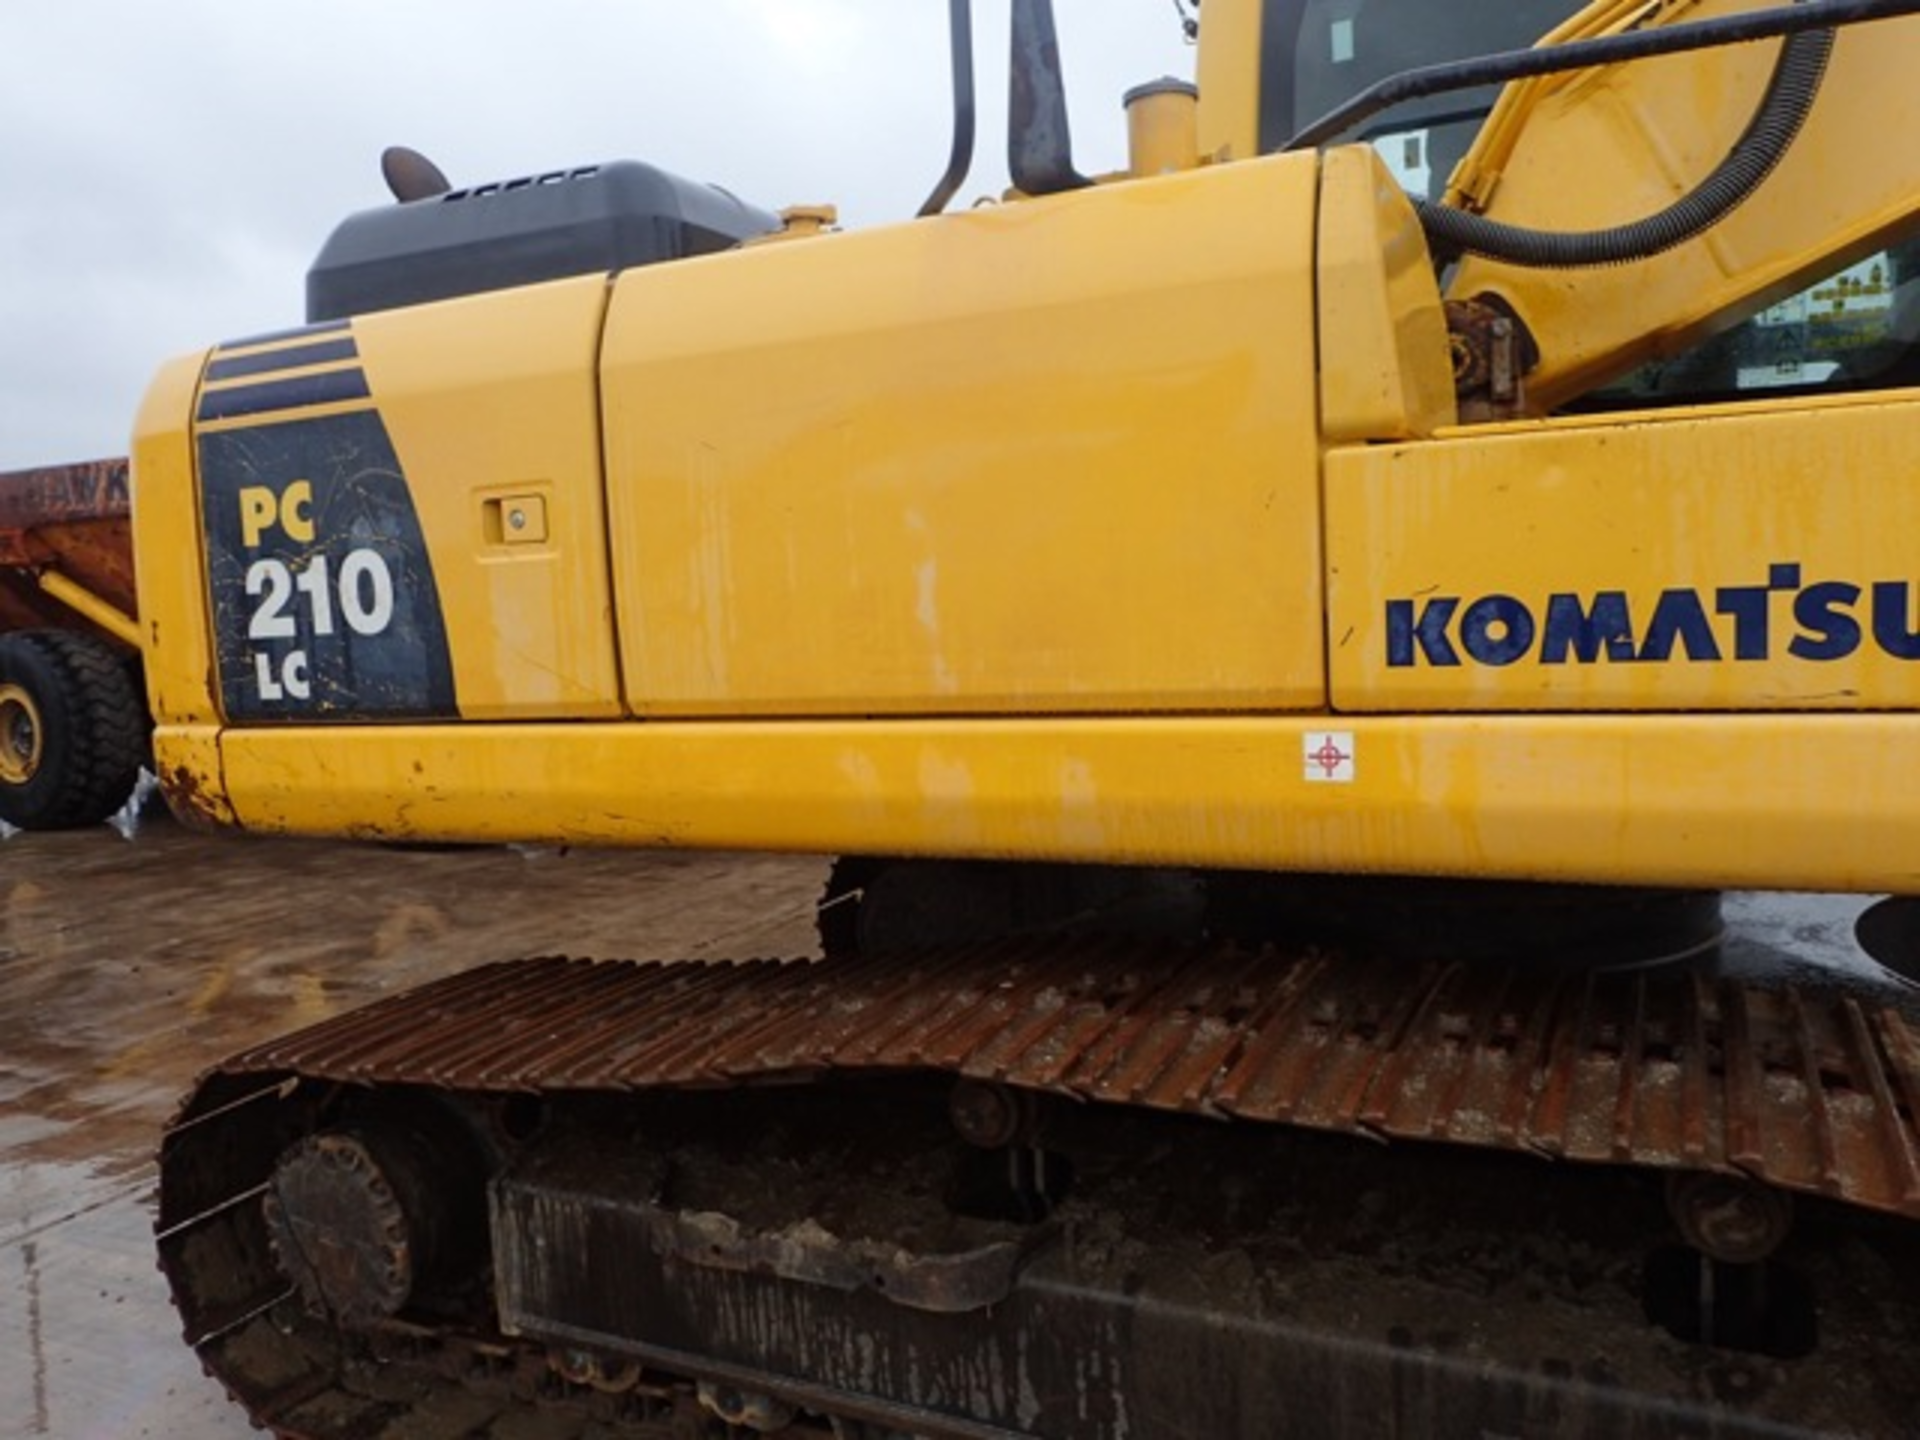 Komatsu PC210 LC 21 tonne steel tracked excavator Year: 2010 S/N: K53470 Recorded Hours: 8748 - Image 7 of 19